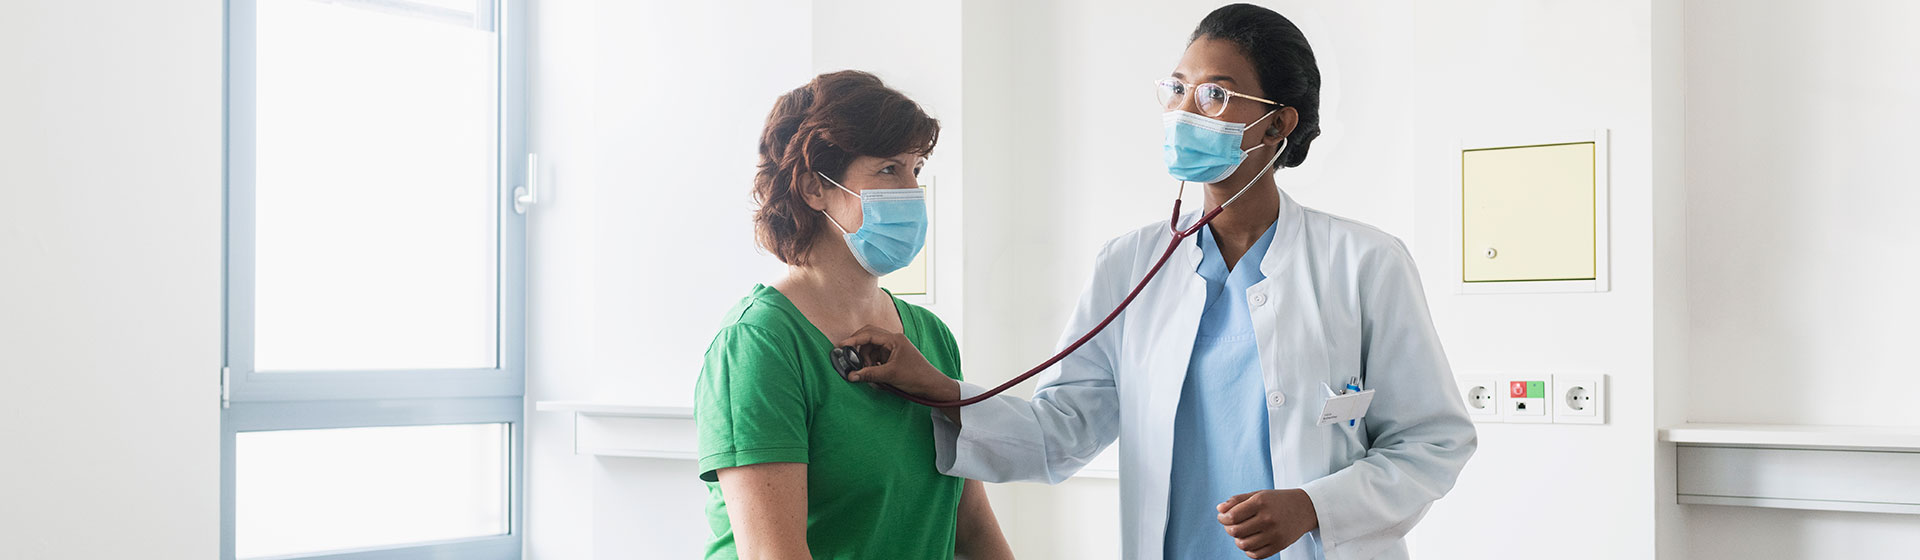 Masked female doctor checking patient's heart